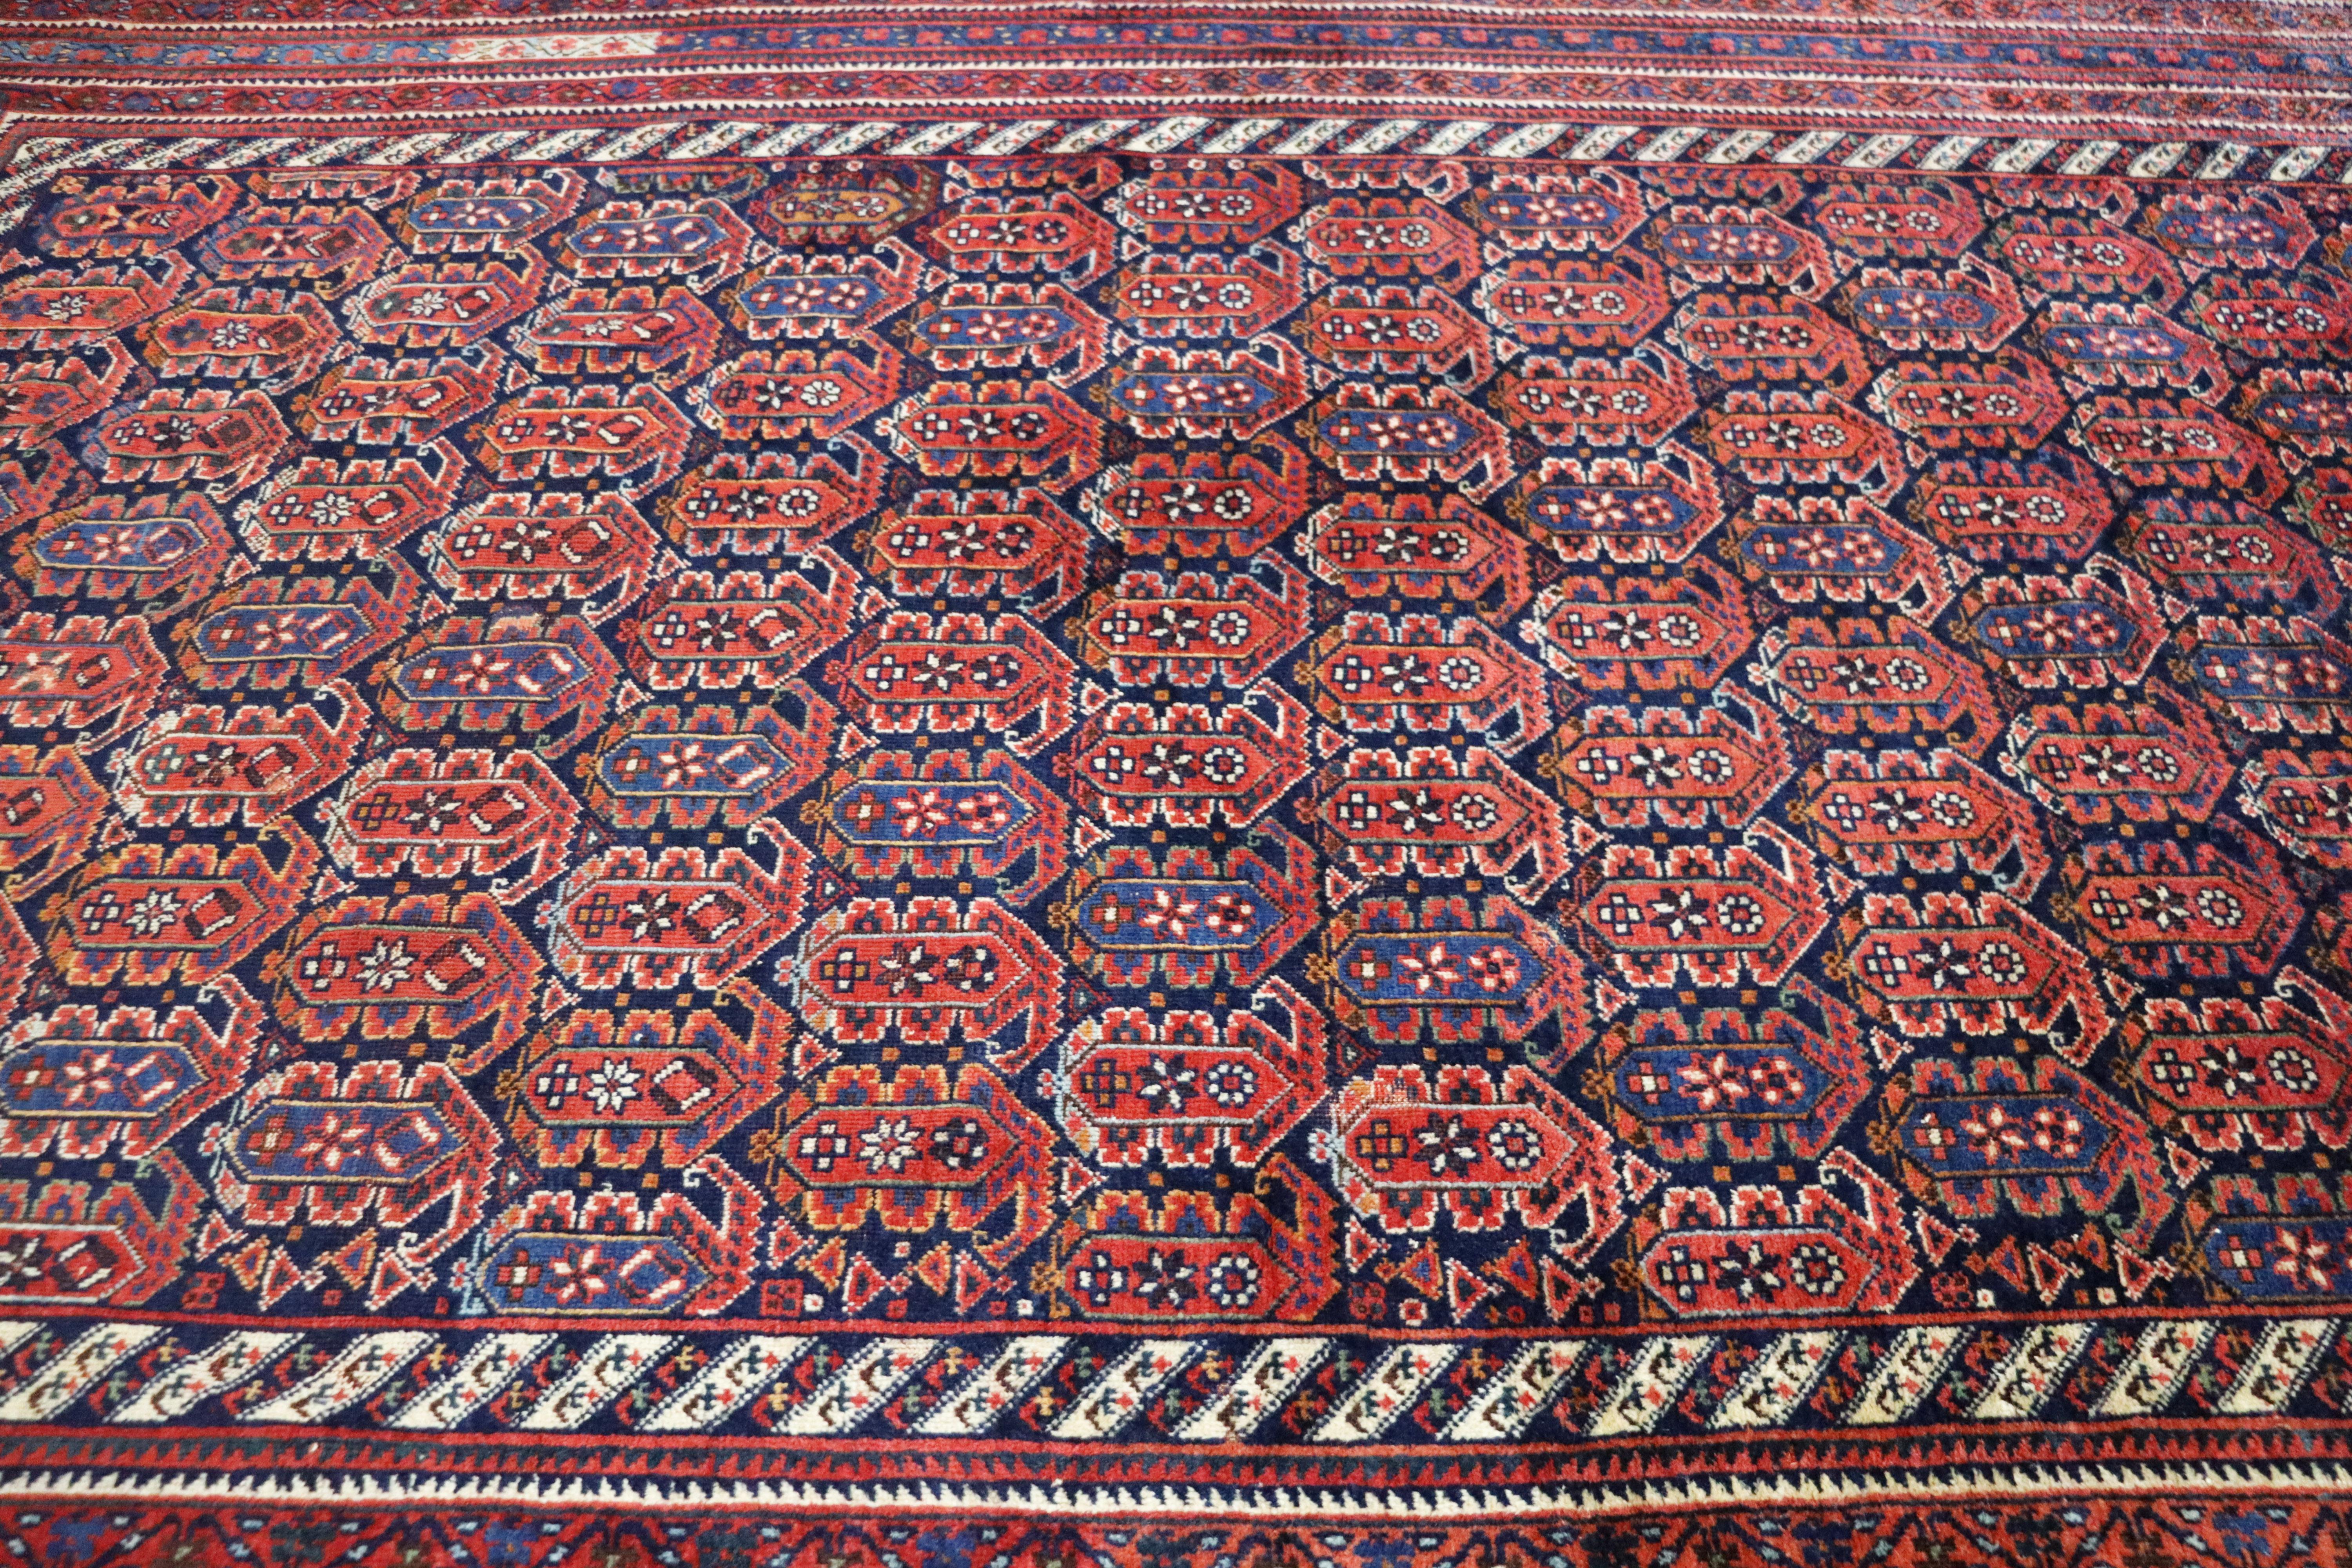 Wool Antique Persian Afshar Carpet, Magnificent, Tribal, 5'8